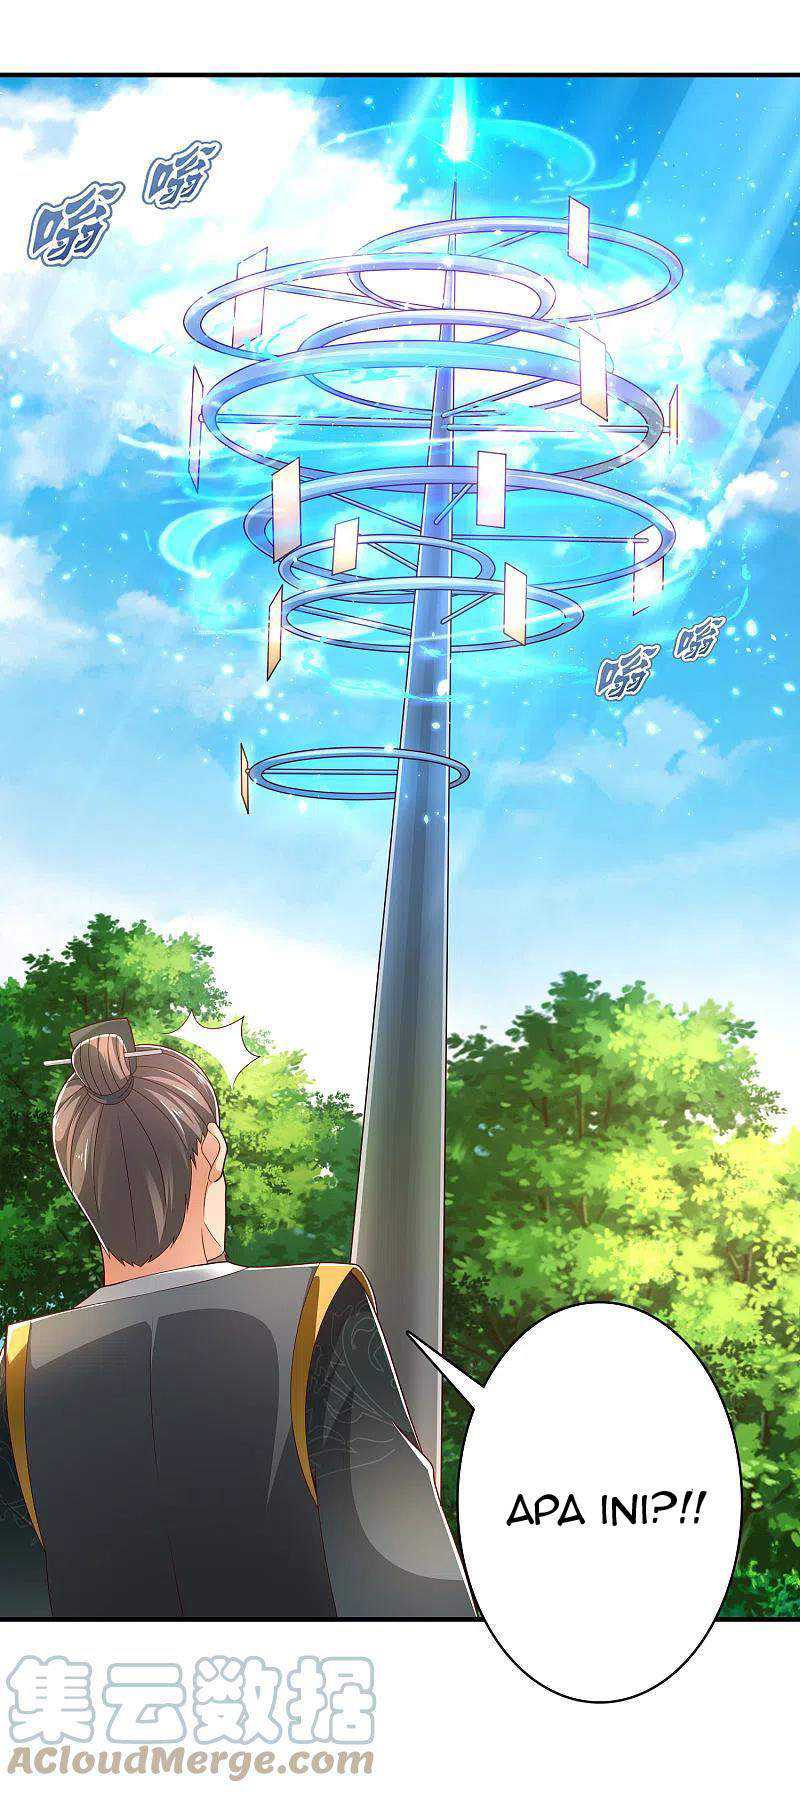 Science And Technology Fairy Chapter 28